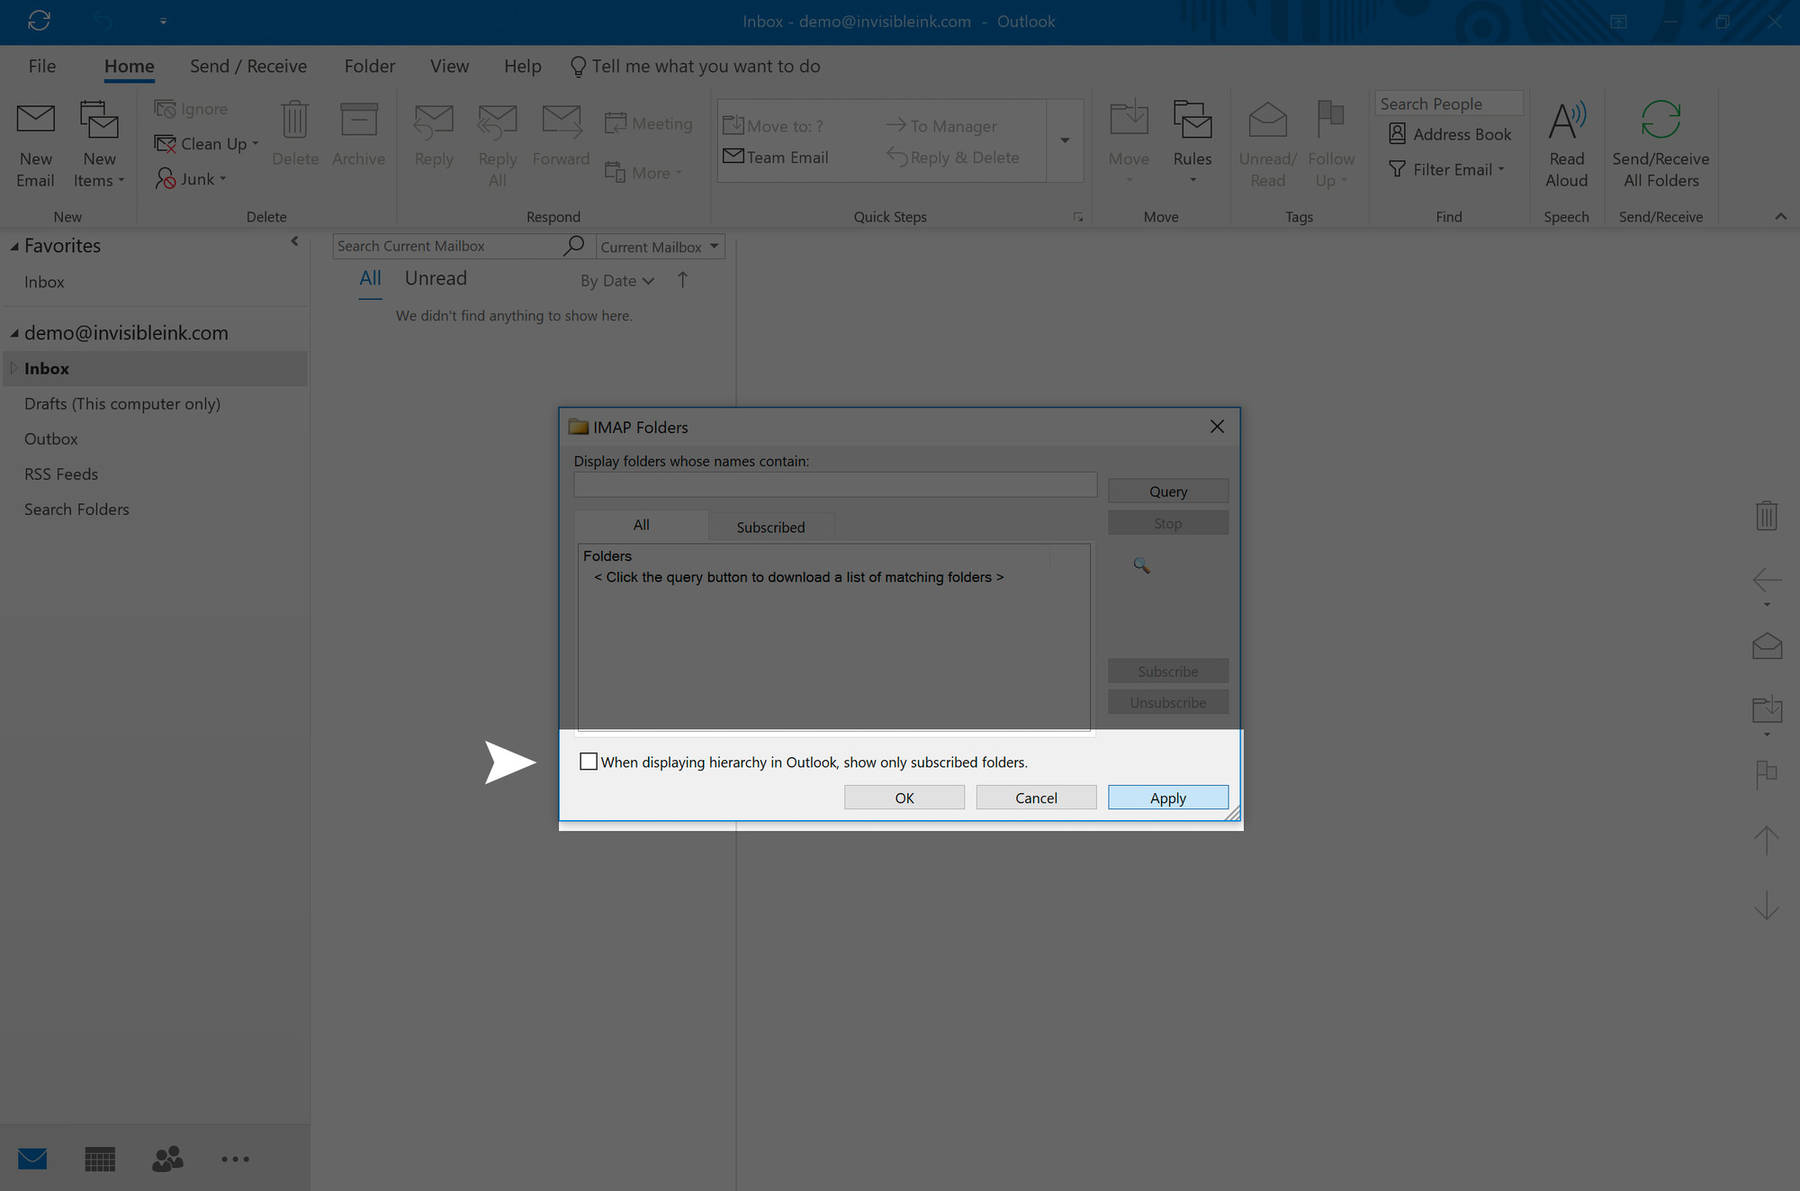 Step 7: From the IMAP folder dialog box, uncheck the box next to "When displaying hierarchy in Outlook, show only the subscribed folders." Click Apply to save the changes, the click OK to close the IMAP Folders window. Click Send/Receive all folders to check your new account.